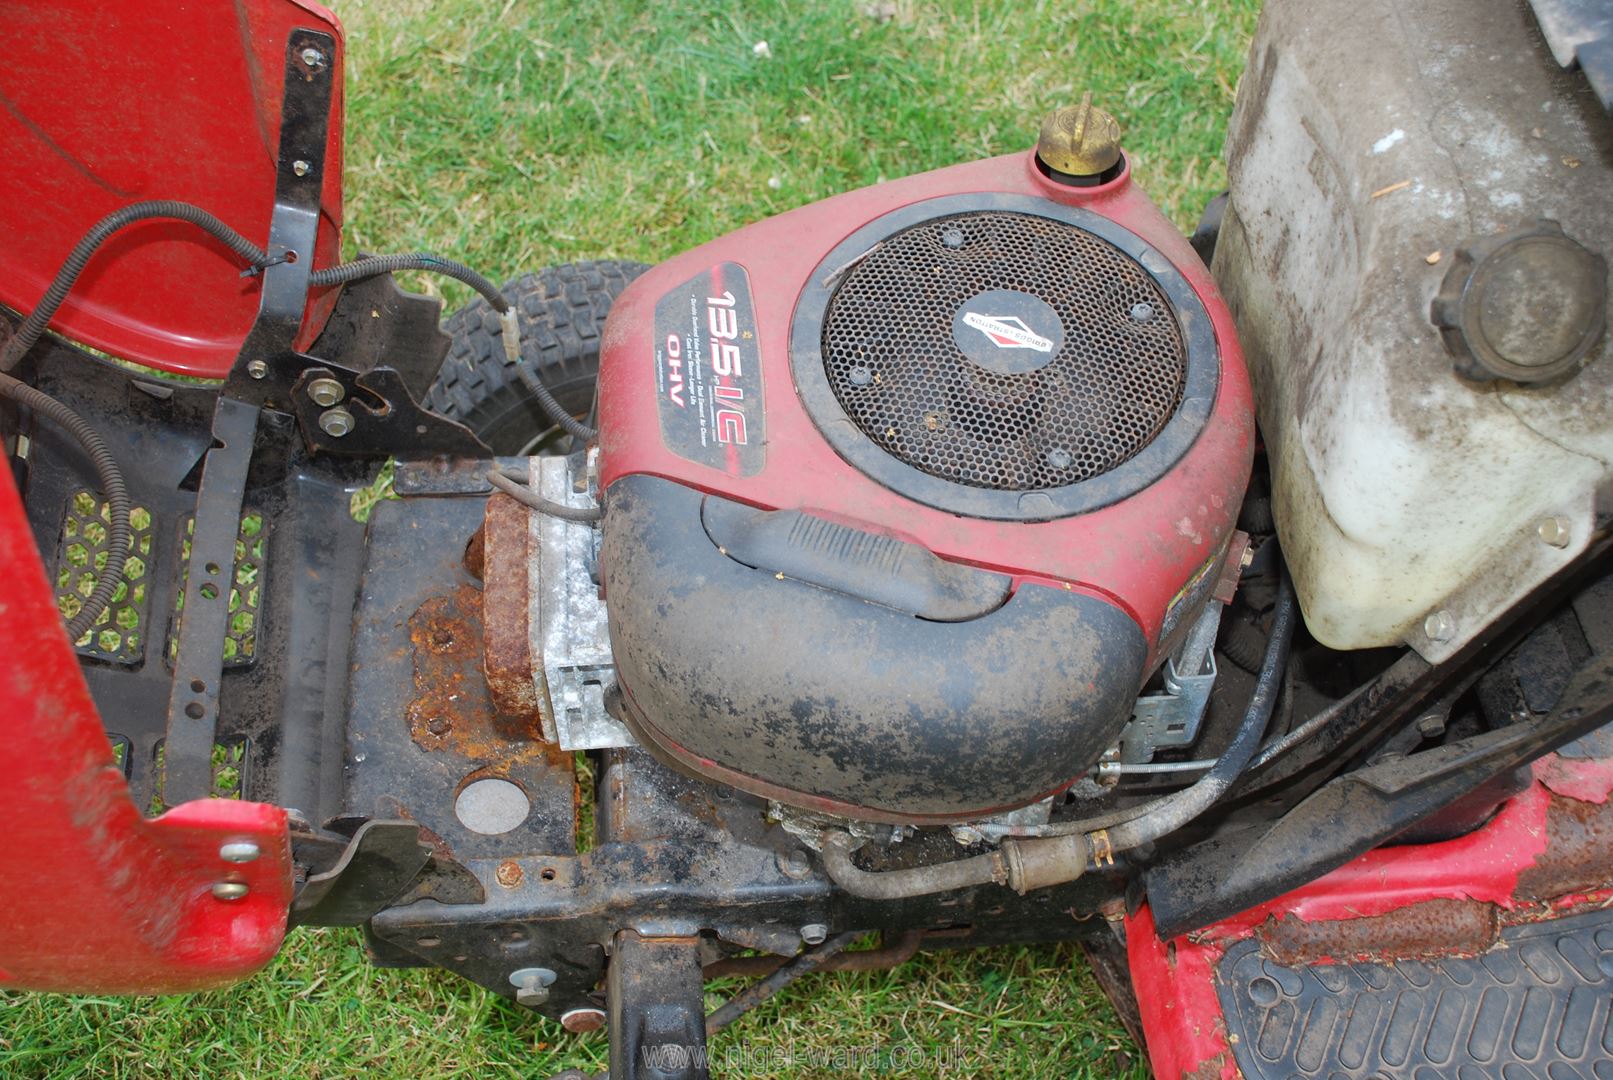 A Lawn-flite Ride-on mower with Briggs & Stratton 13.5 hp overhead valve engine. - Image 2 of 4